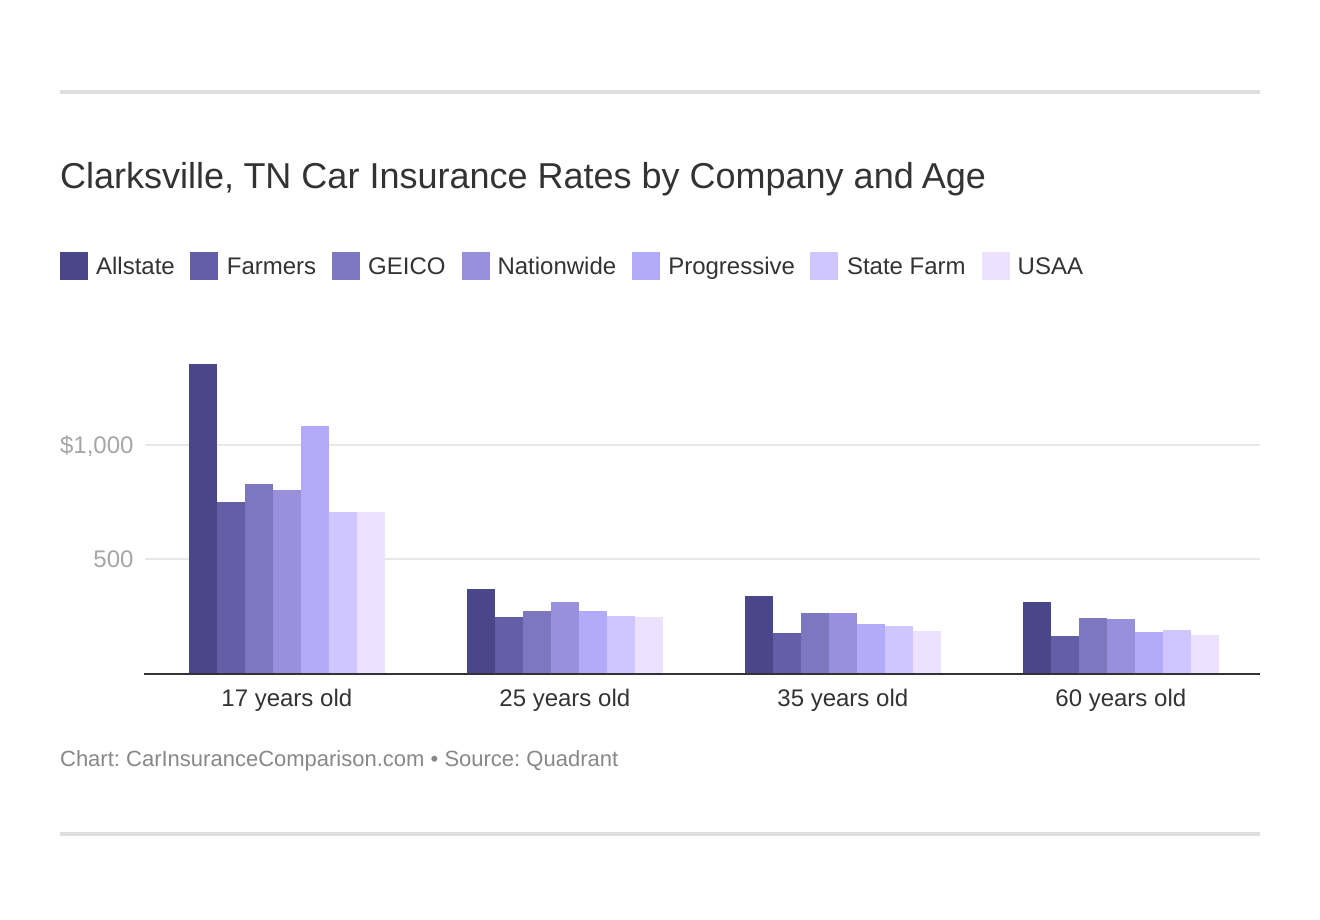 Clarksville, TN Car Insurance Rates by Company and Age